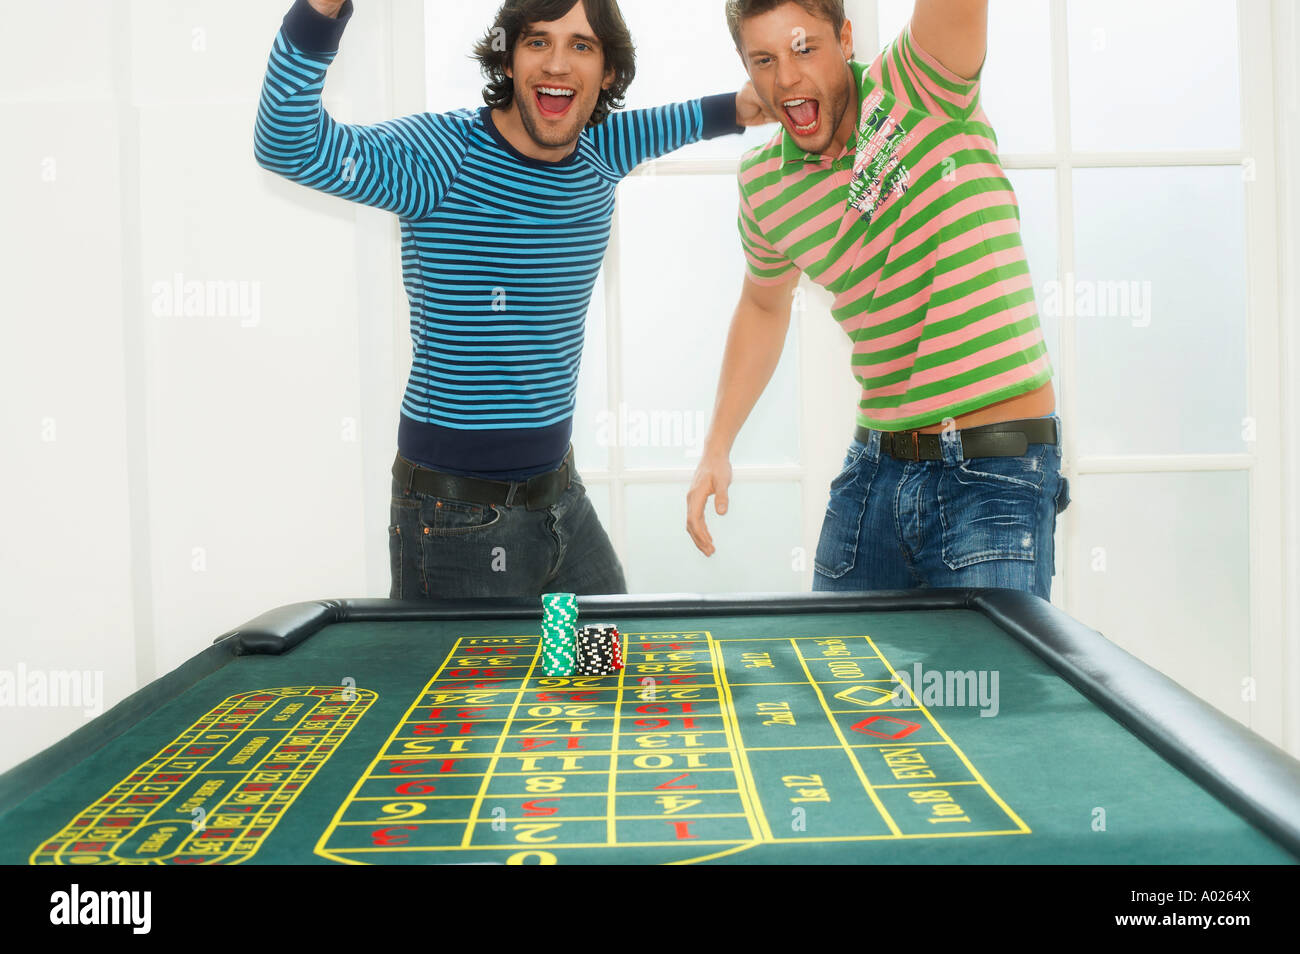 Two young men celebrating on roulette table, portrait Stock Photo